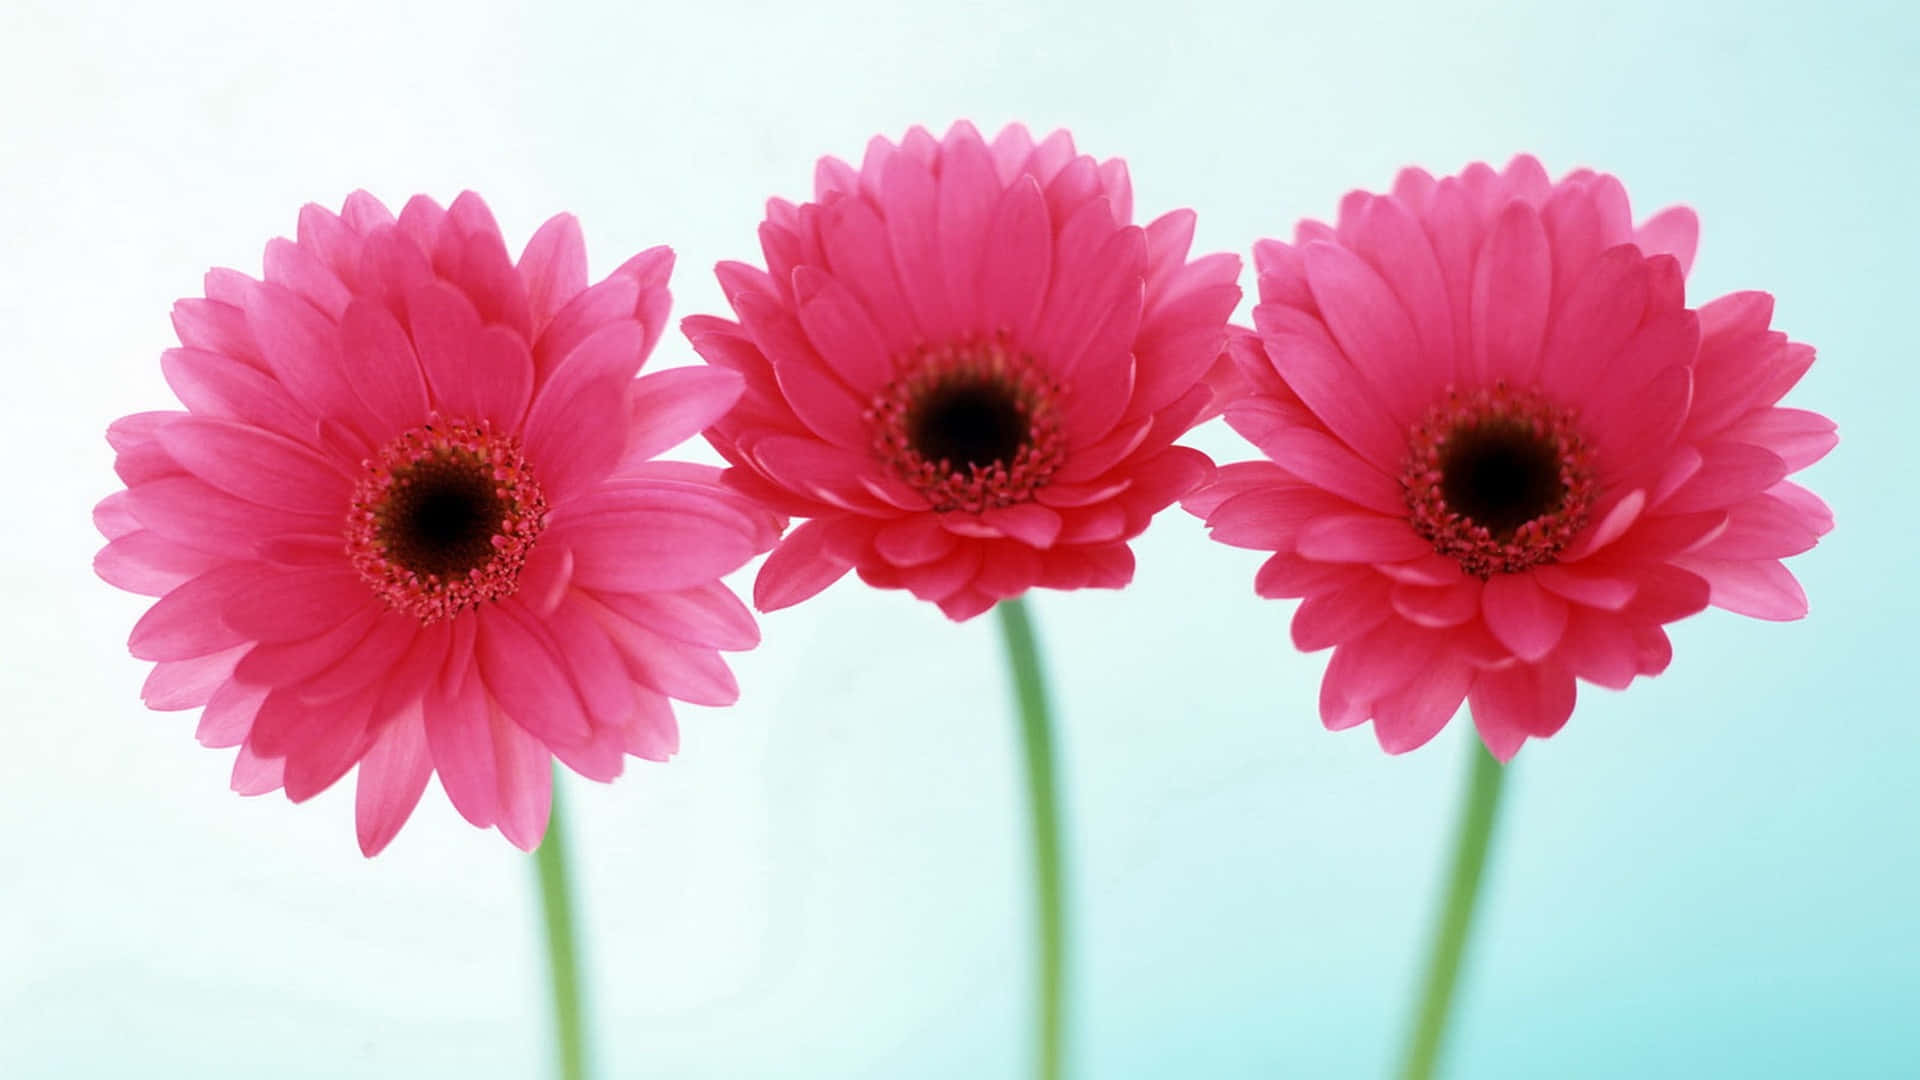 Three Pink Gerberas Are In A Vase Against A Blue Background